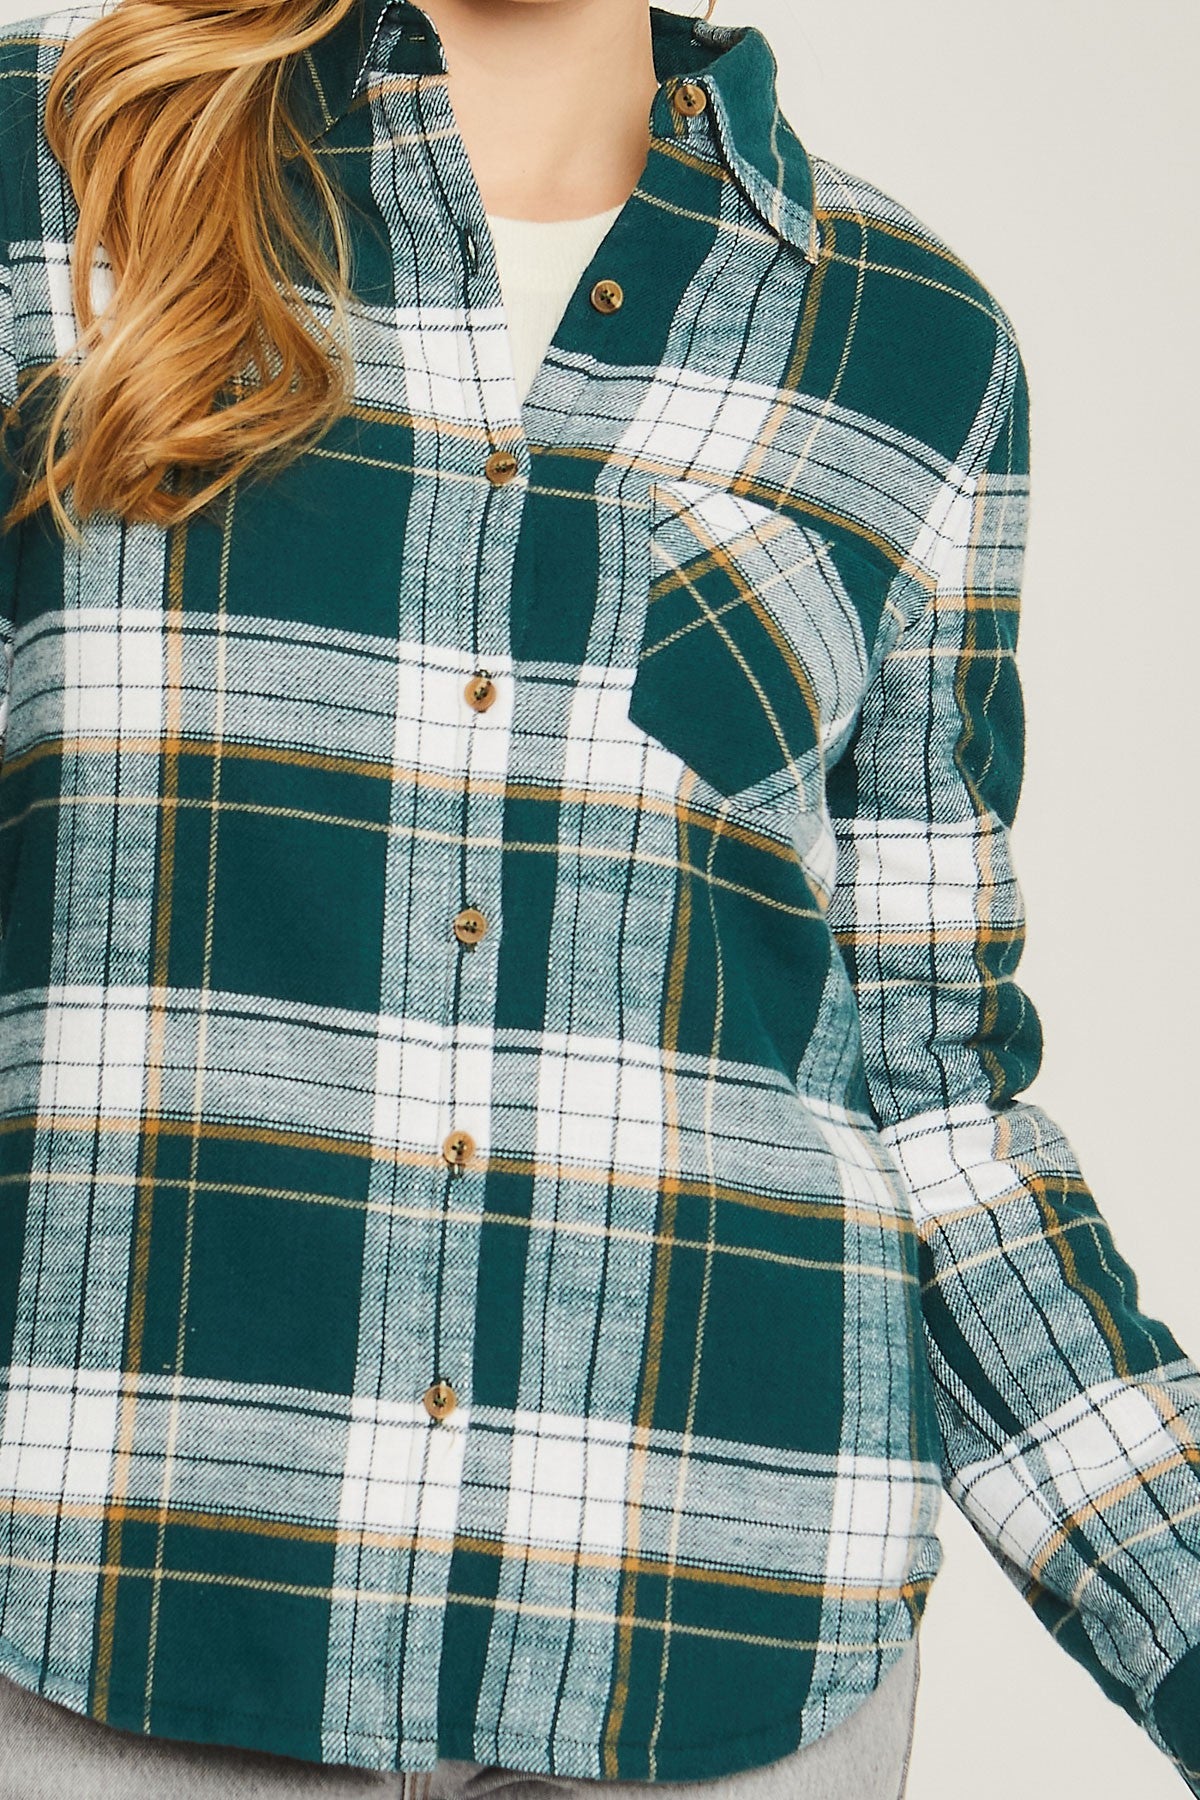 Long Sleeve Plaid Button Up With Sherpa Lining